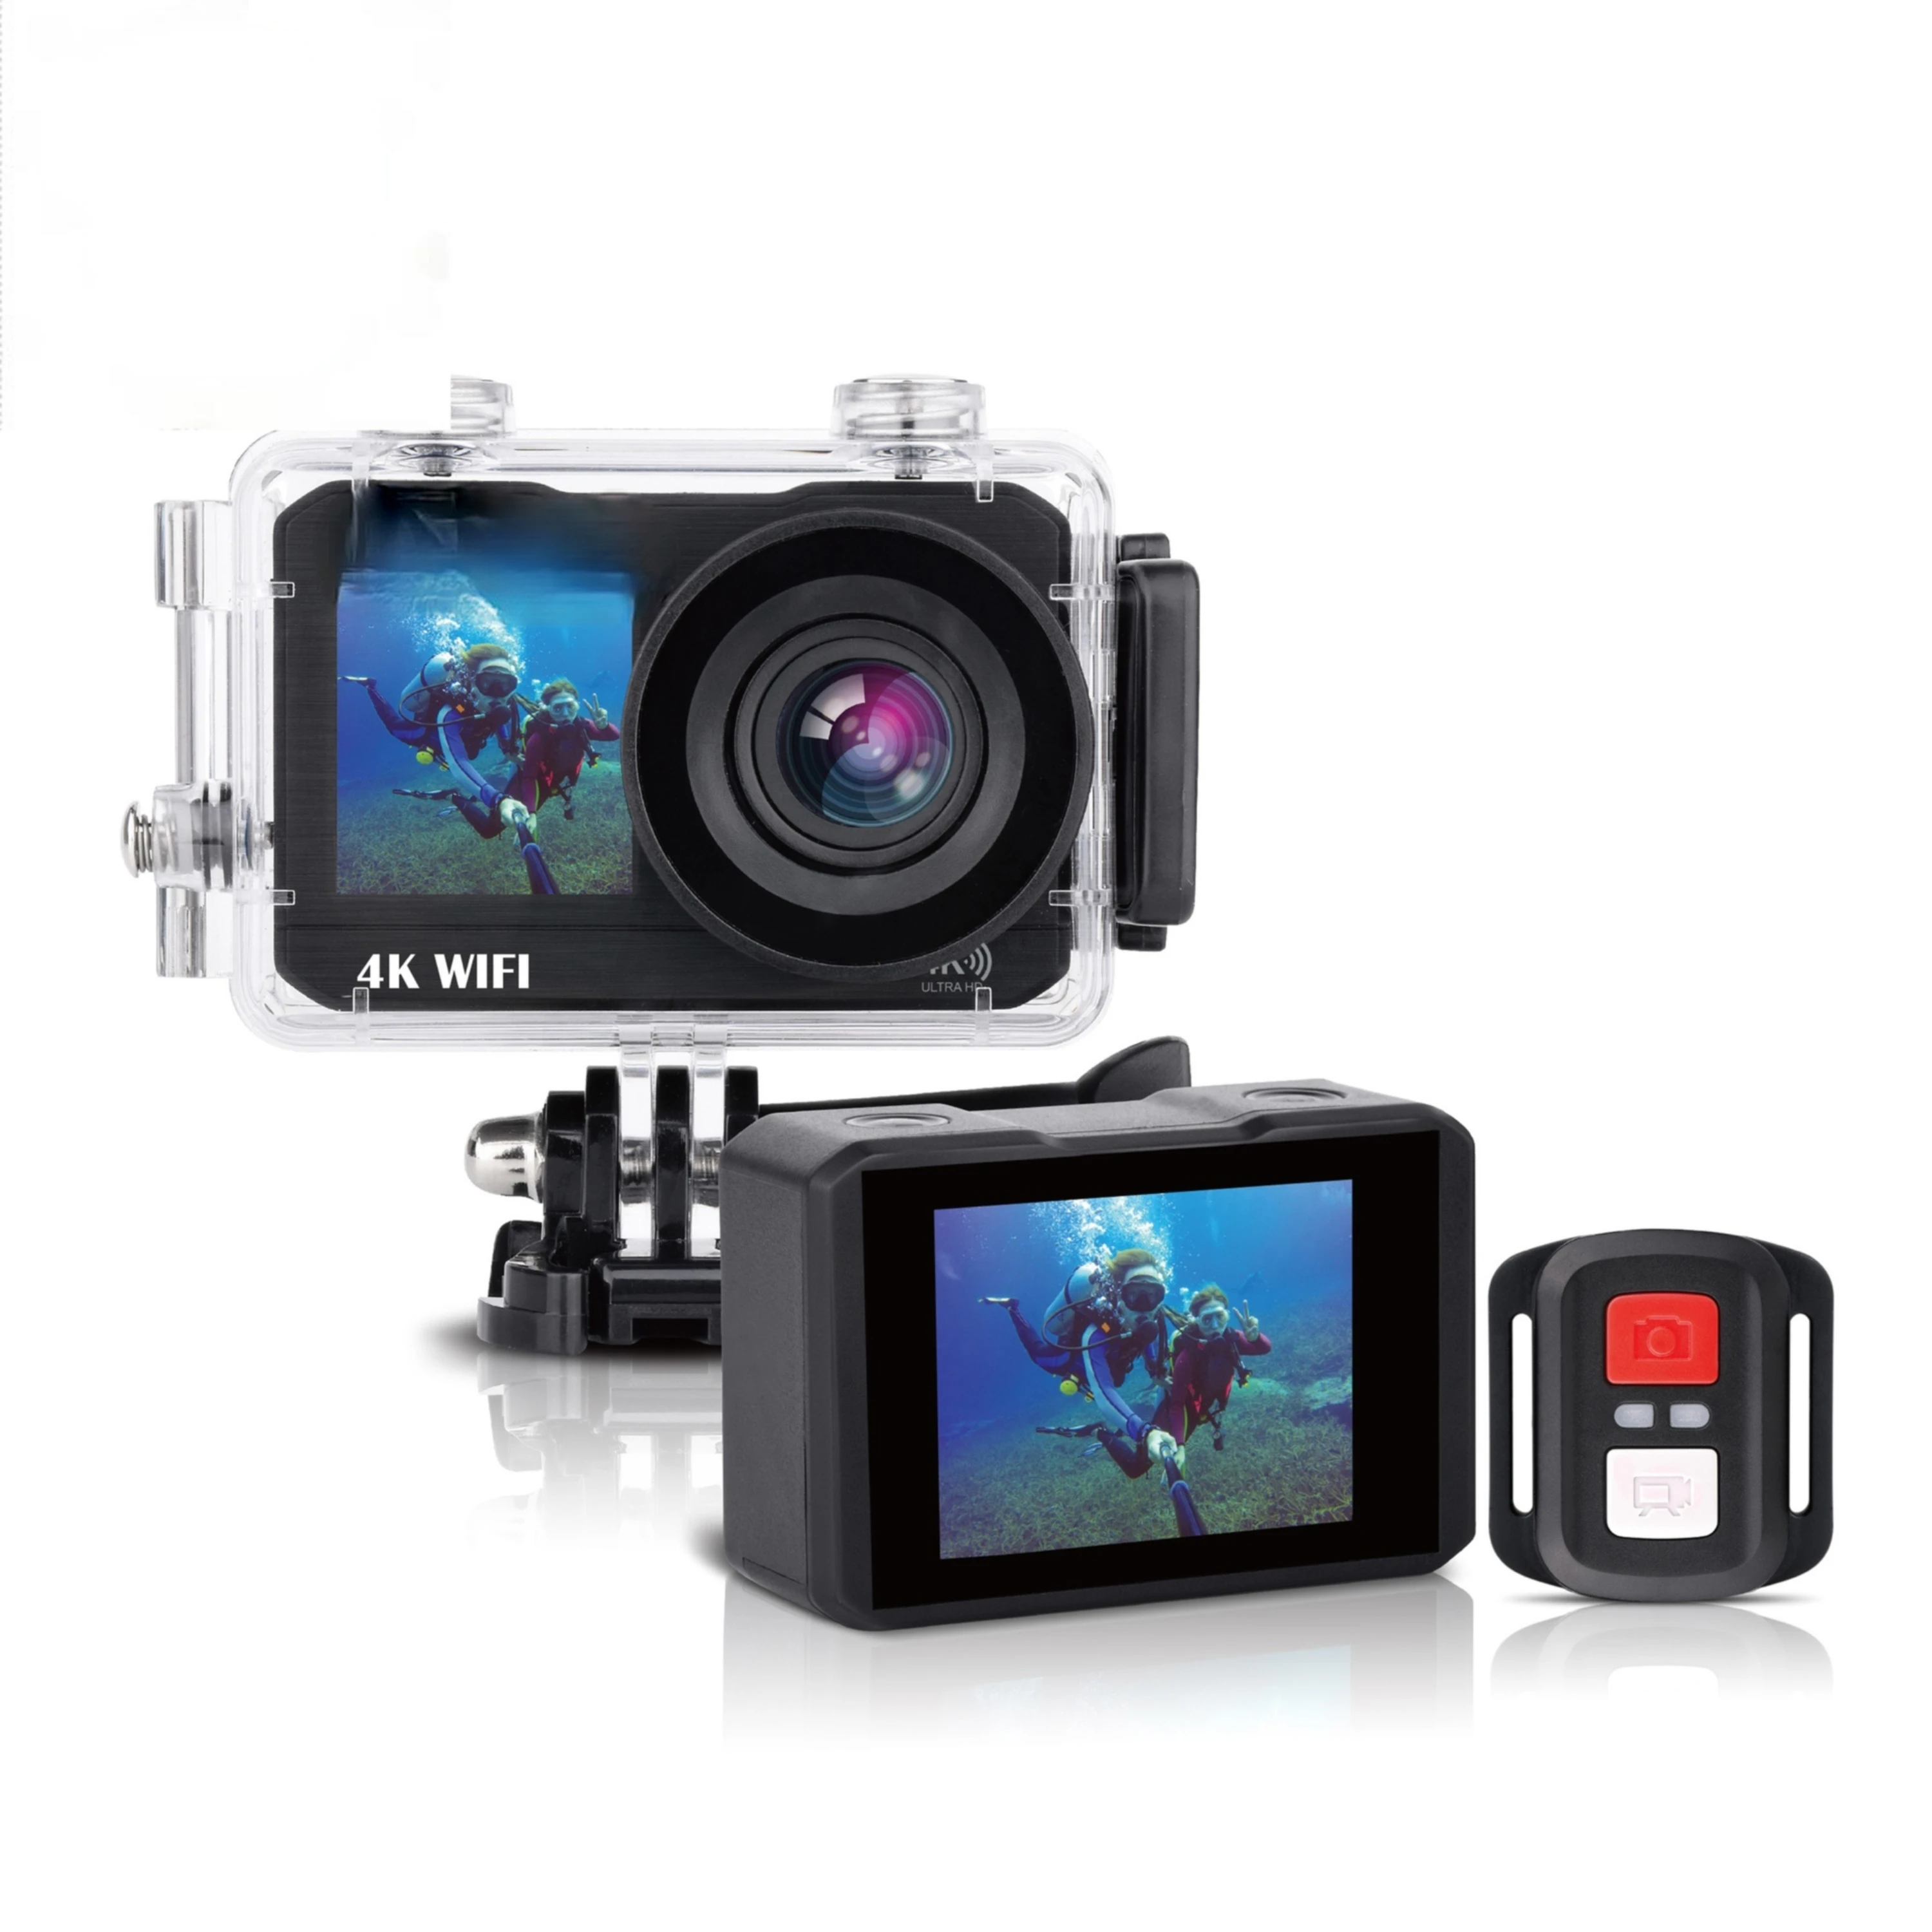 4k wifi action camera dual screens  action cam sports cam wholesale high quality sport camera sq12 waterproof camera wireless wifi high definition sports dv camera wide angle security night vision camera